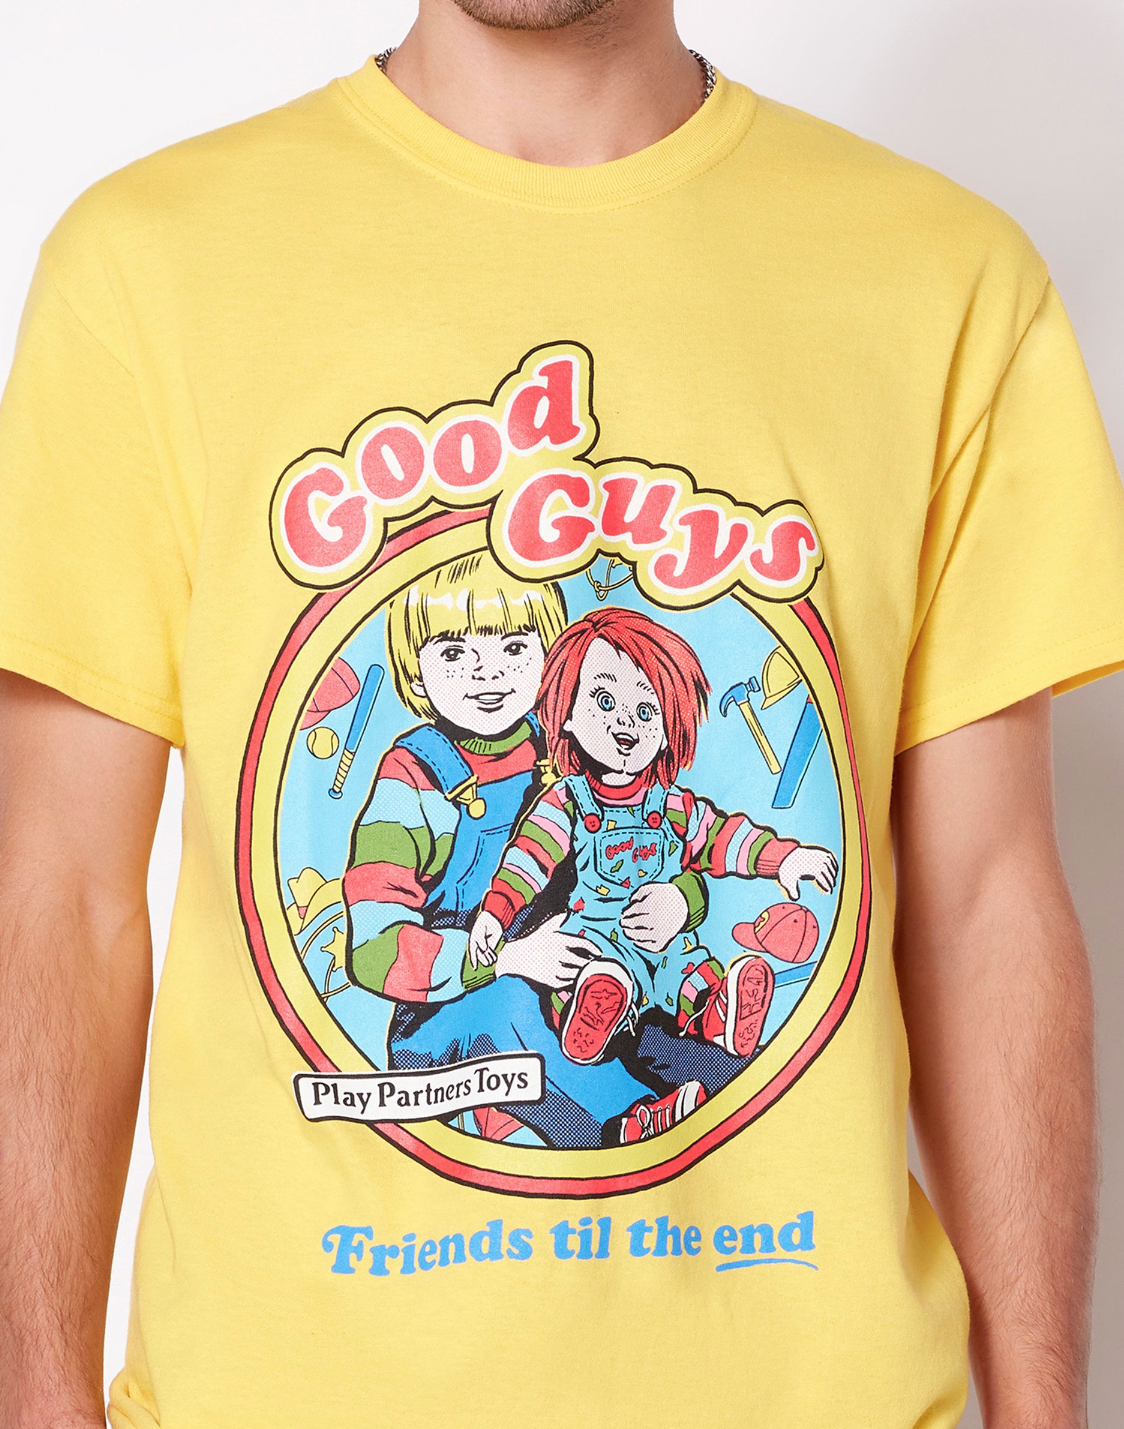 A yellow t shirt with a vintage logo that says good guys and shows a kid in overalls holding a chucky doll and says Friends til the end at the bottom